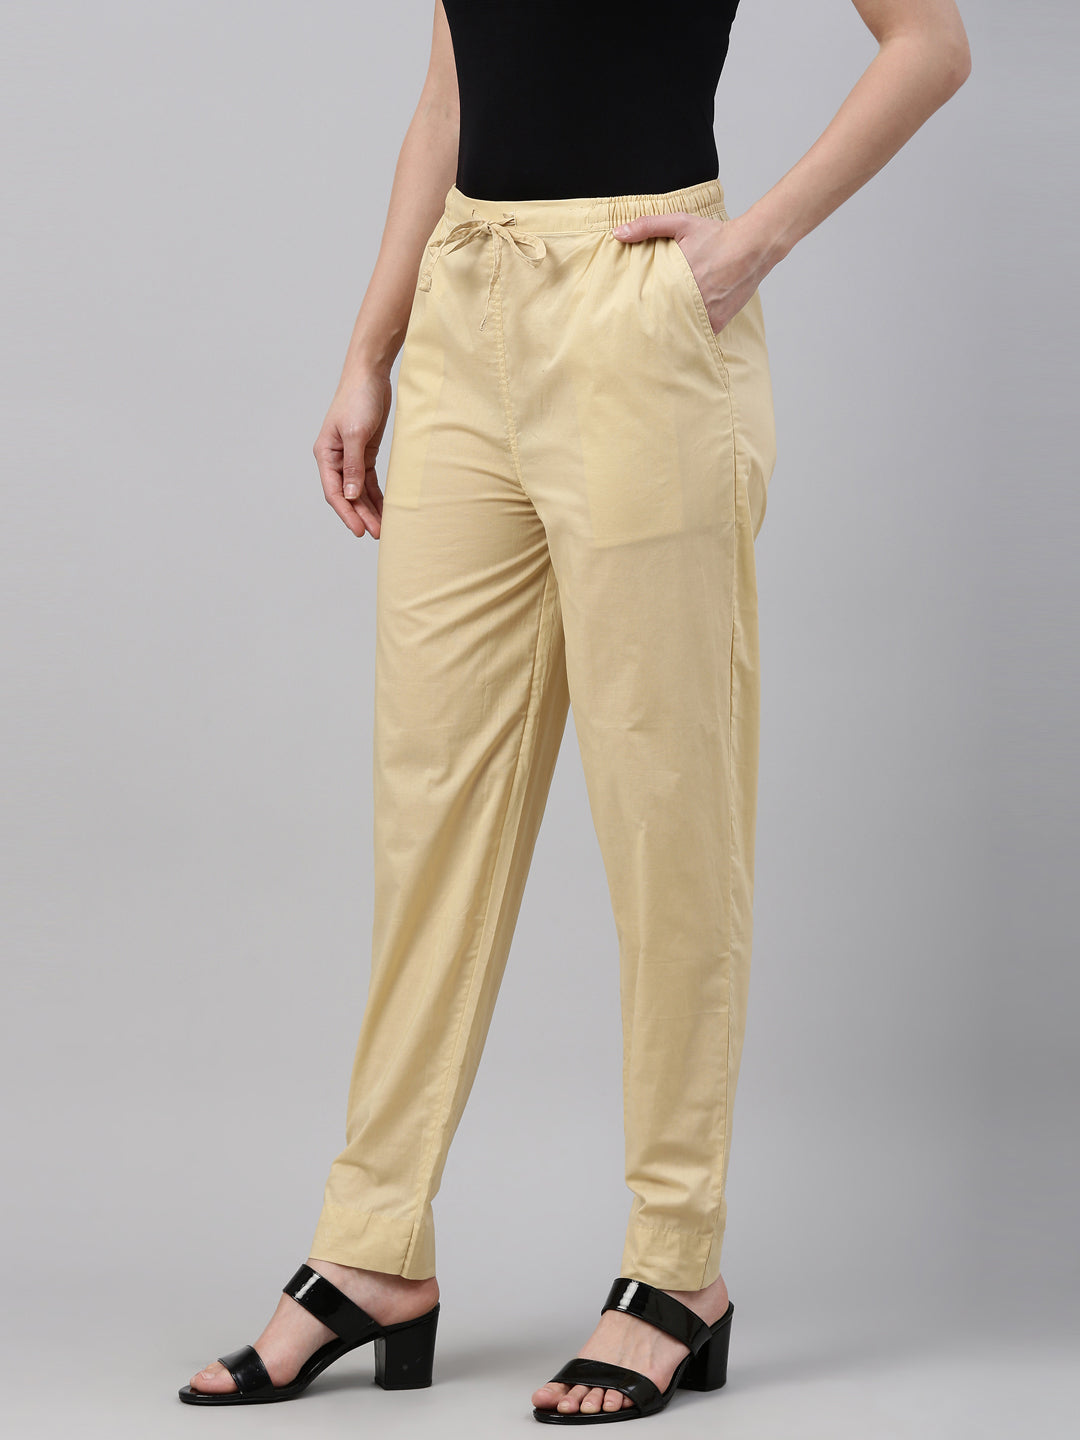 Off-White Cotton Pants for Ladies - Work Wear Cotton Trousers for Women |  CraftsandLooms – CraftsandLooms.com